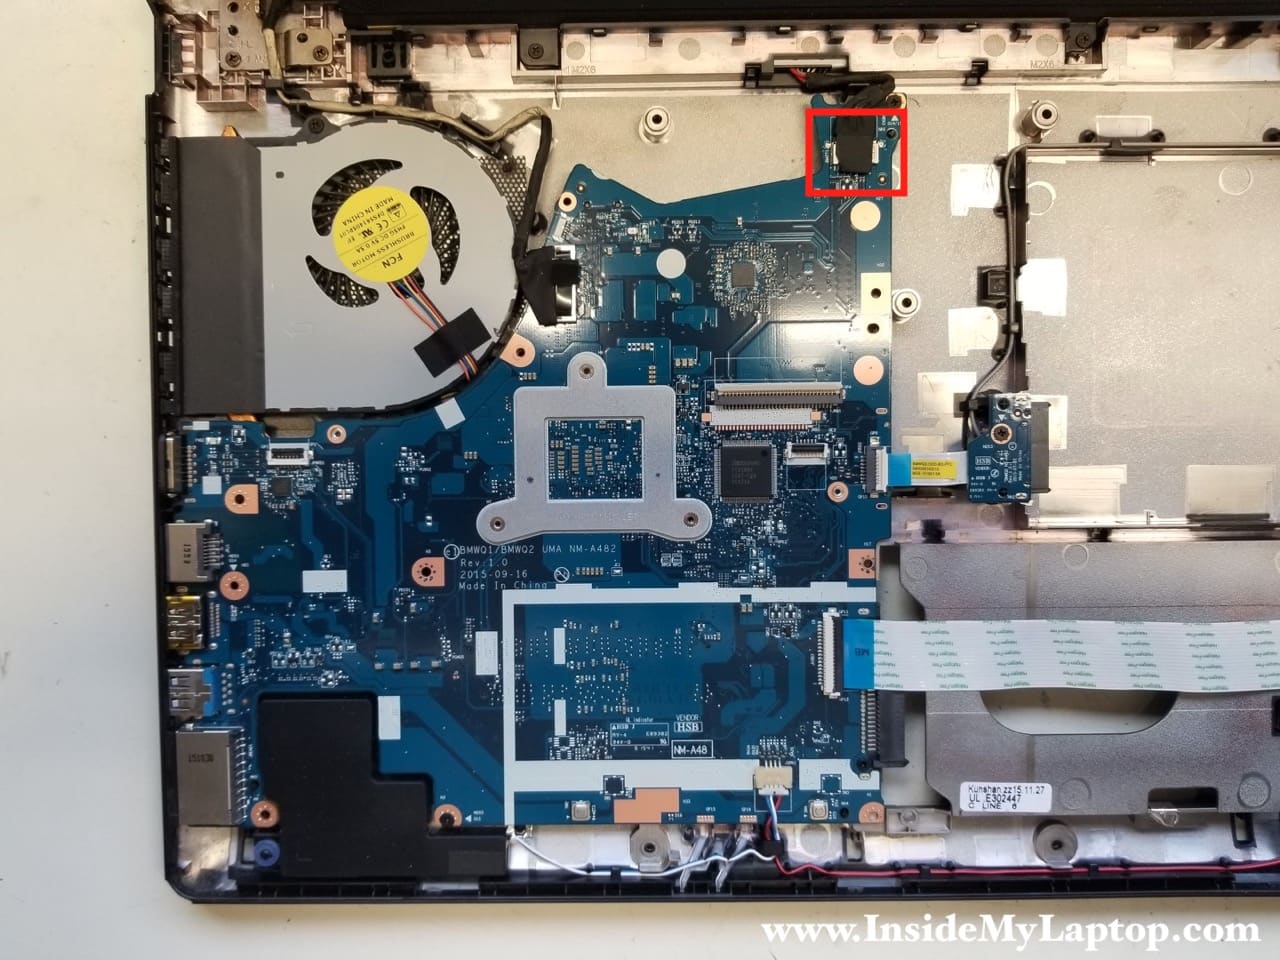 How To Disassemble Lenovo Ideapad 300 15isk Inside My Laptop